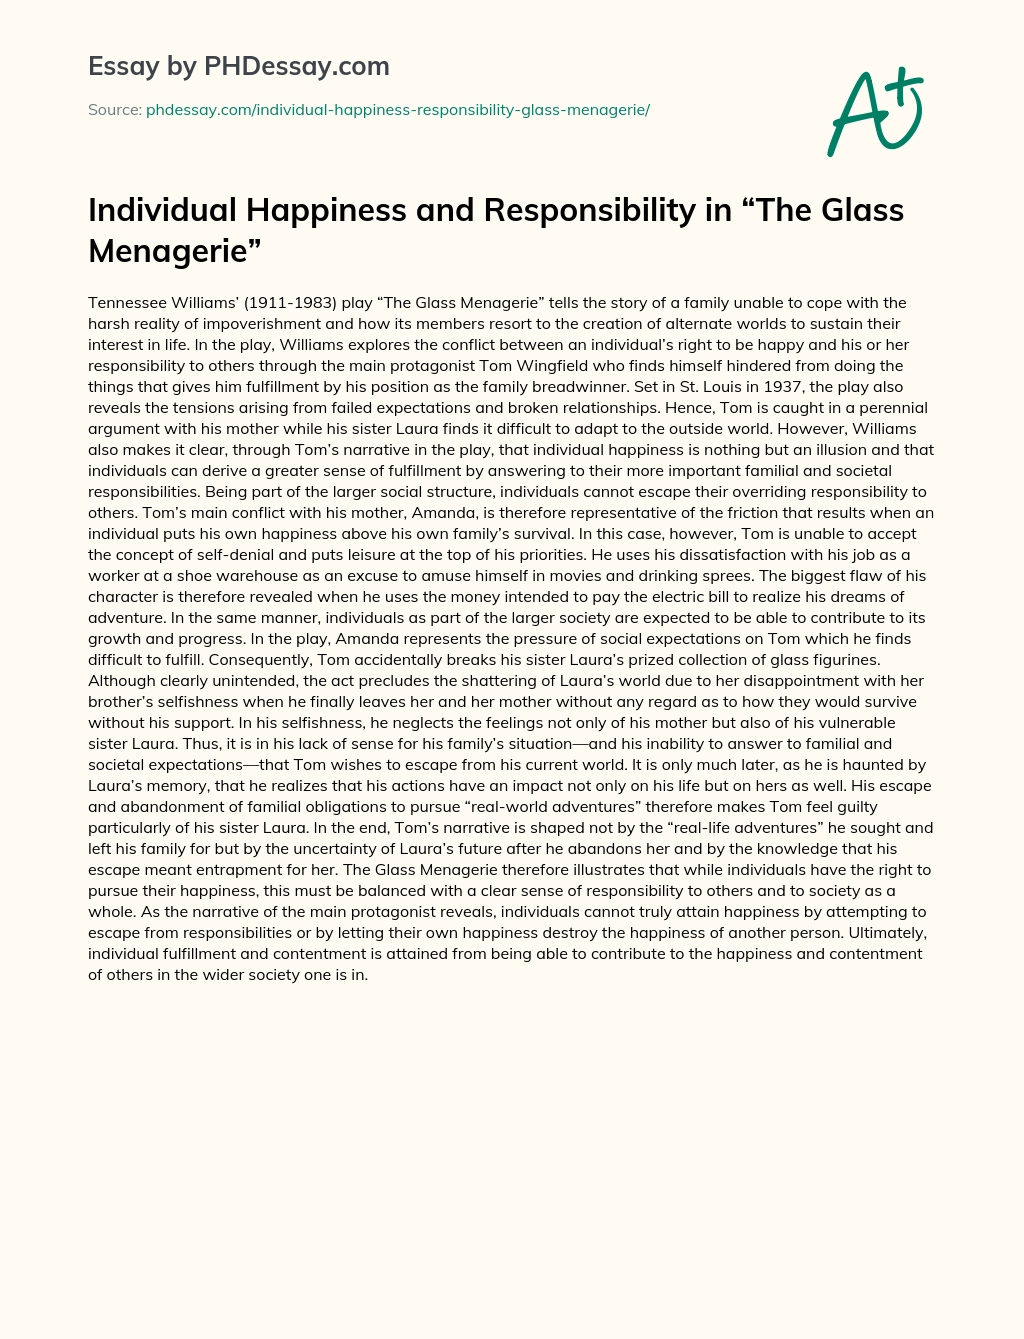 Individual Happiness and Responsibility in “The Glass Menagerie” essay